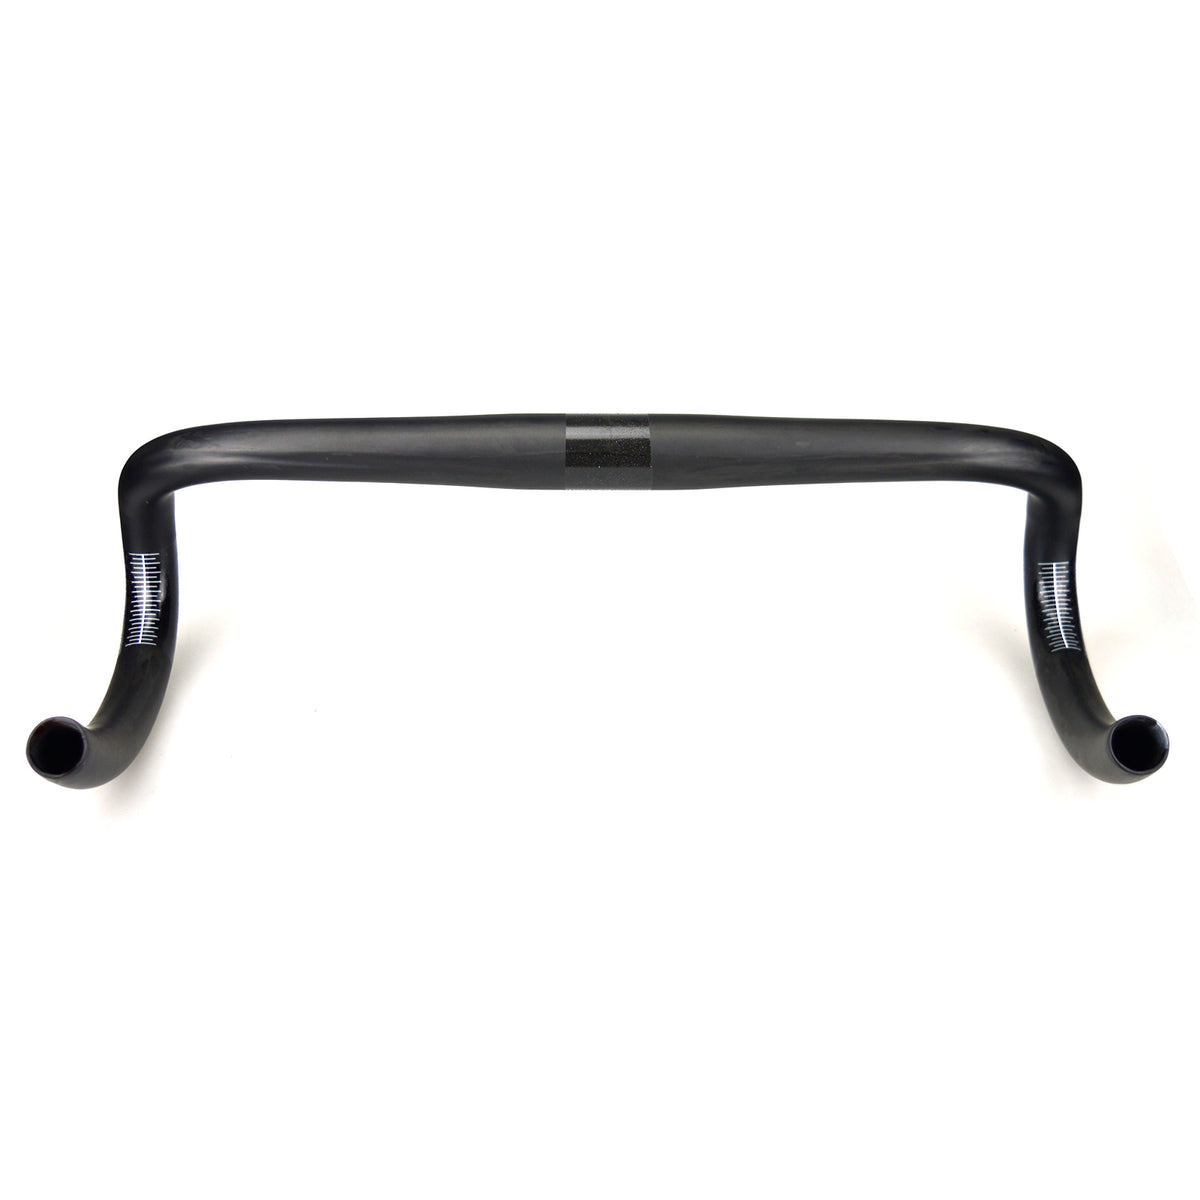 SAVE BIG on DCY HB-034 FULL CARBON ROAD DROP HANDLEBAR 31.8㎜|DCY